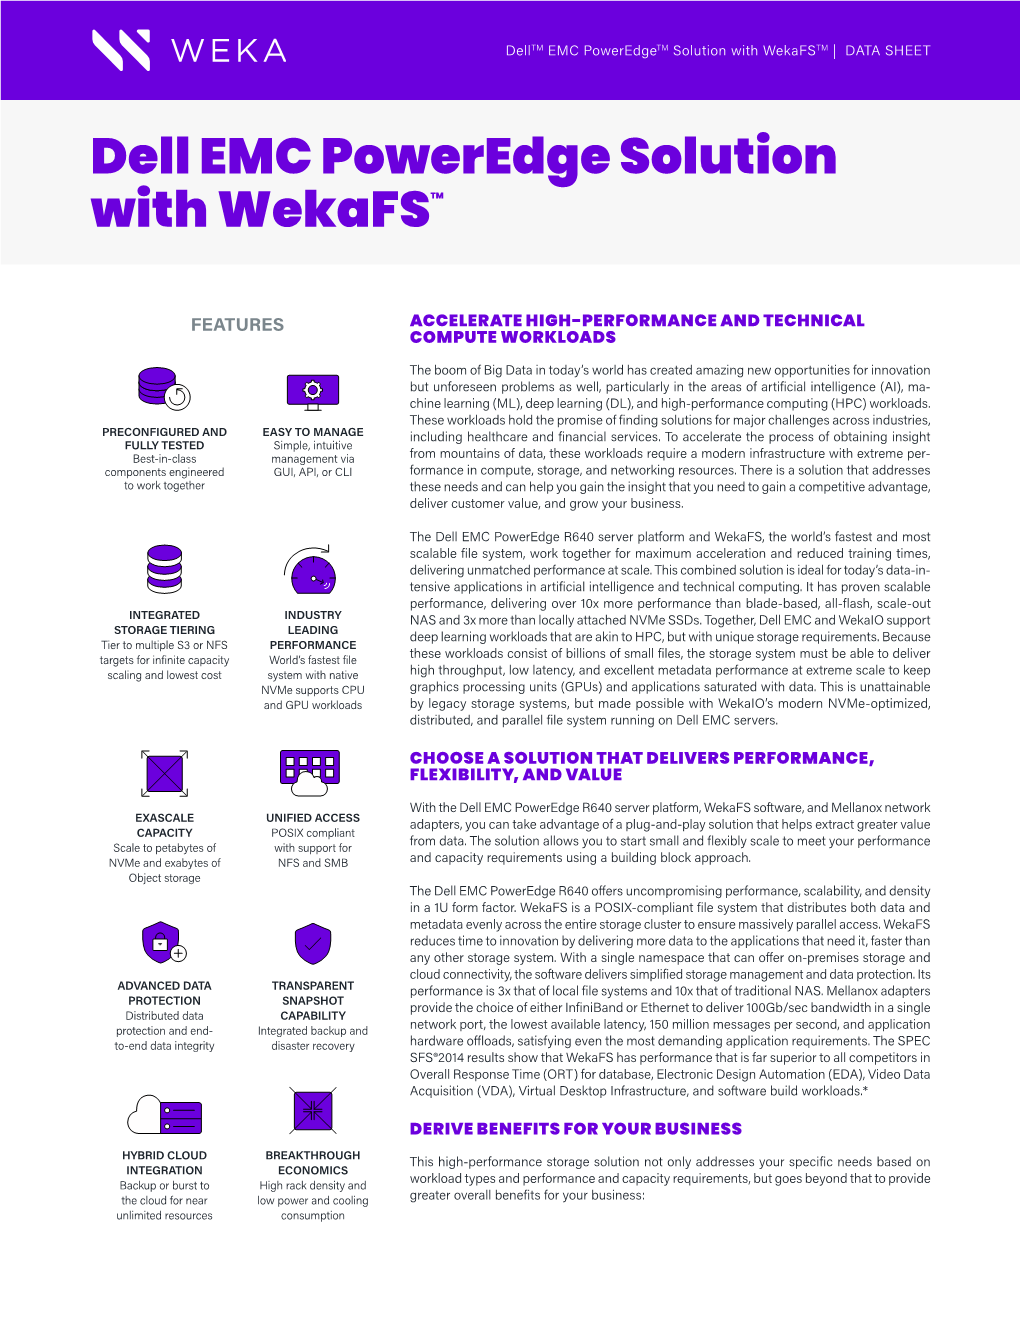 Dell EMC Poweredge Solution with Wekafstm